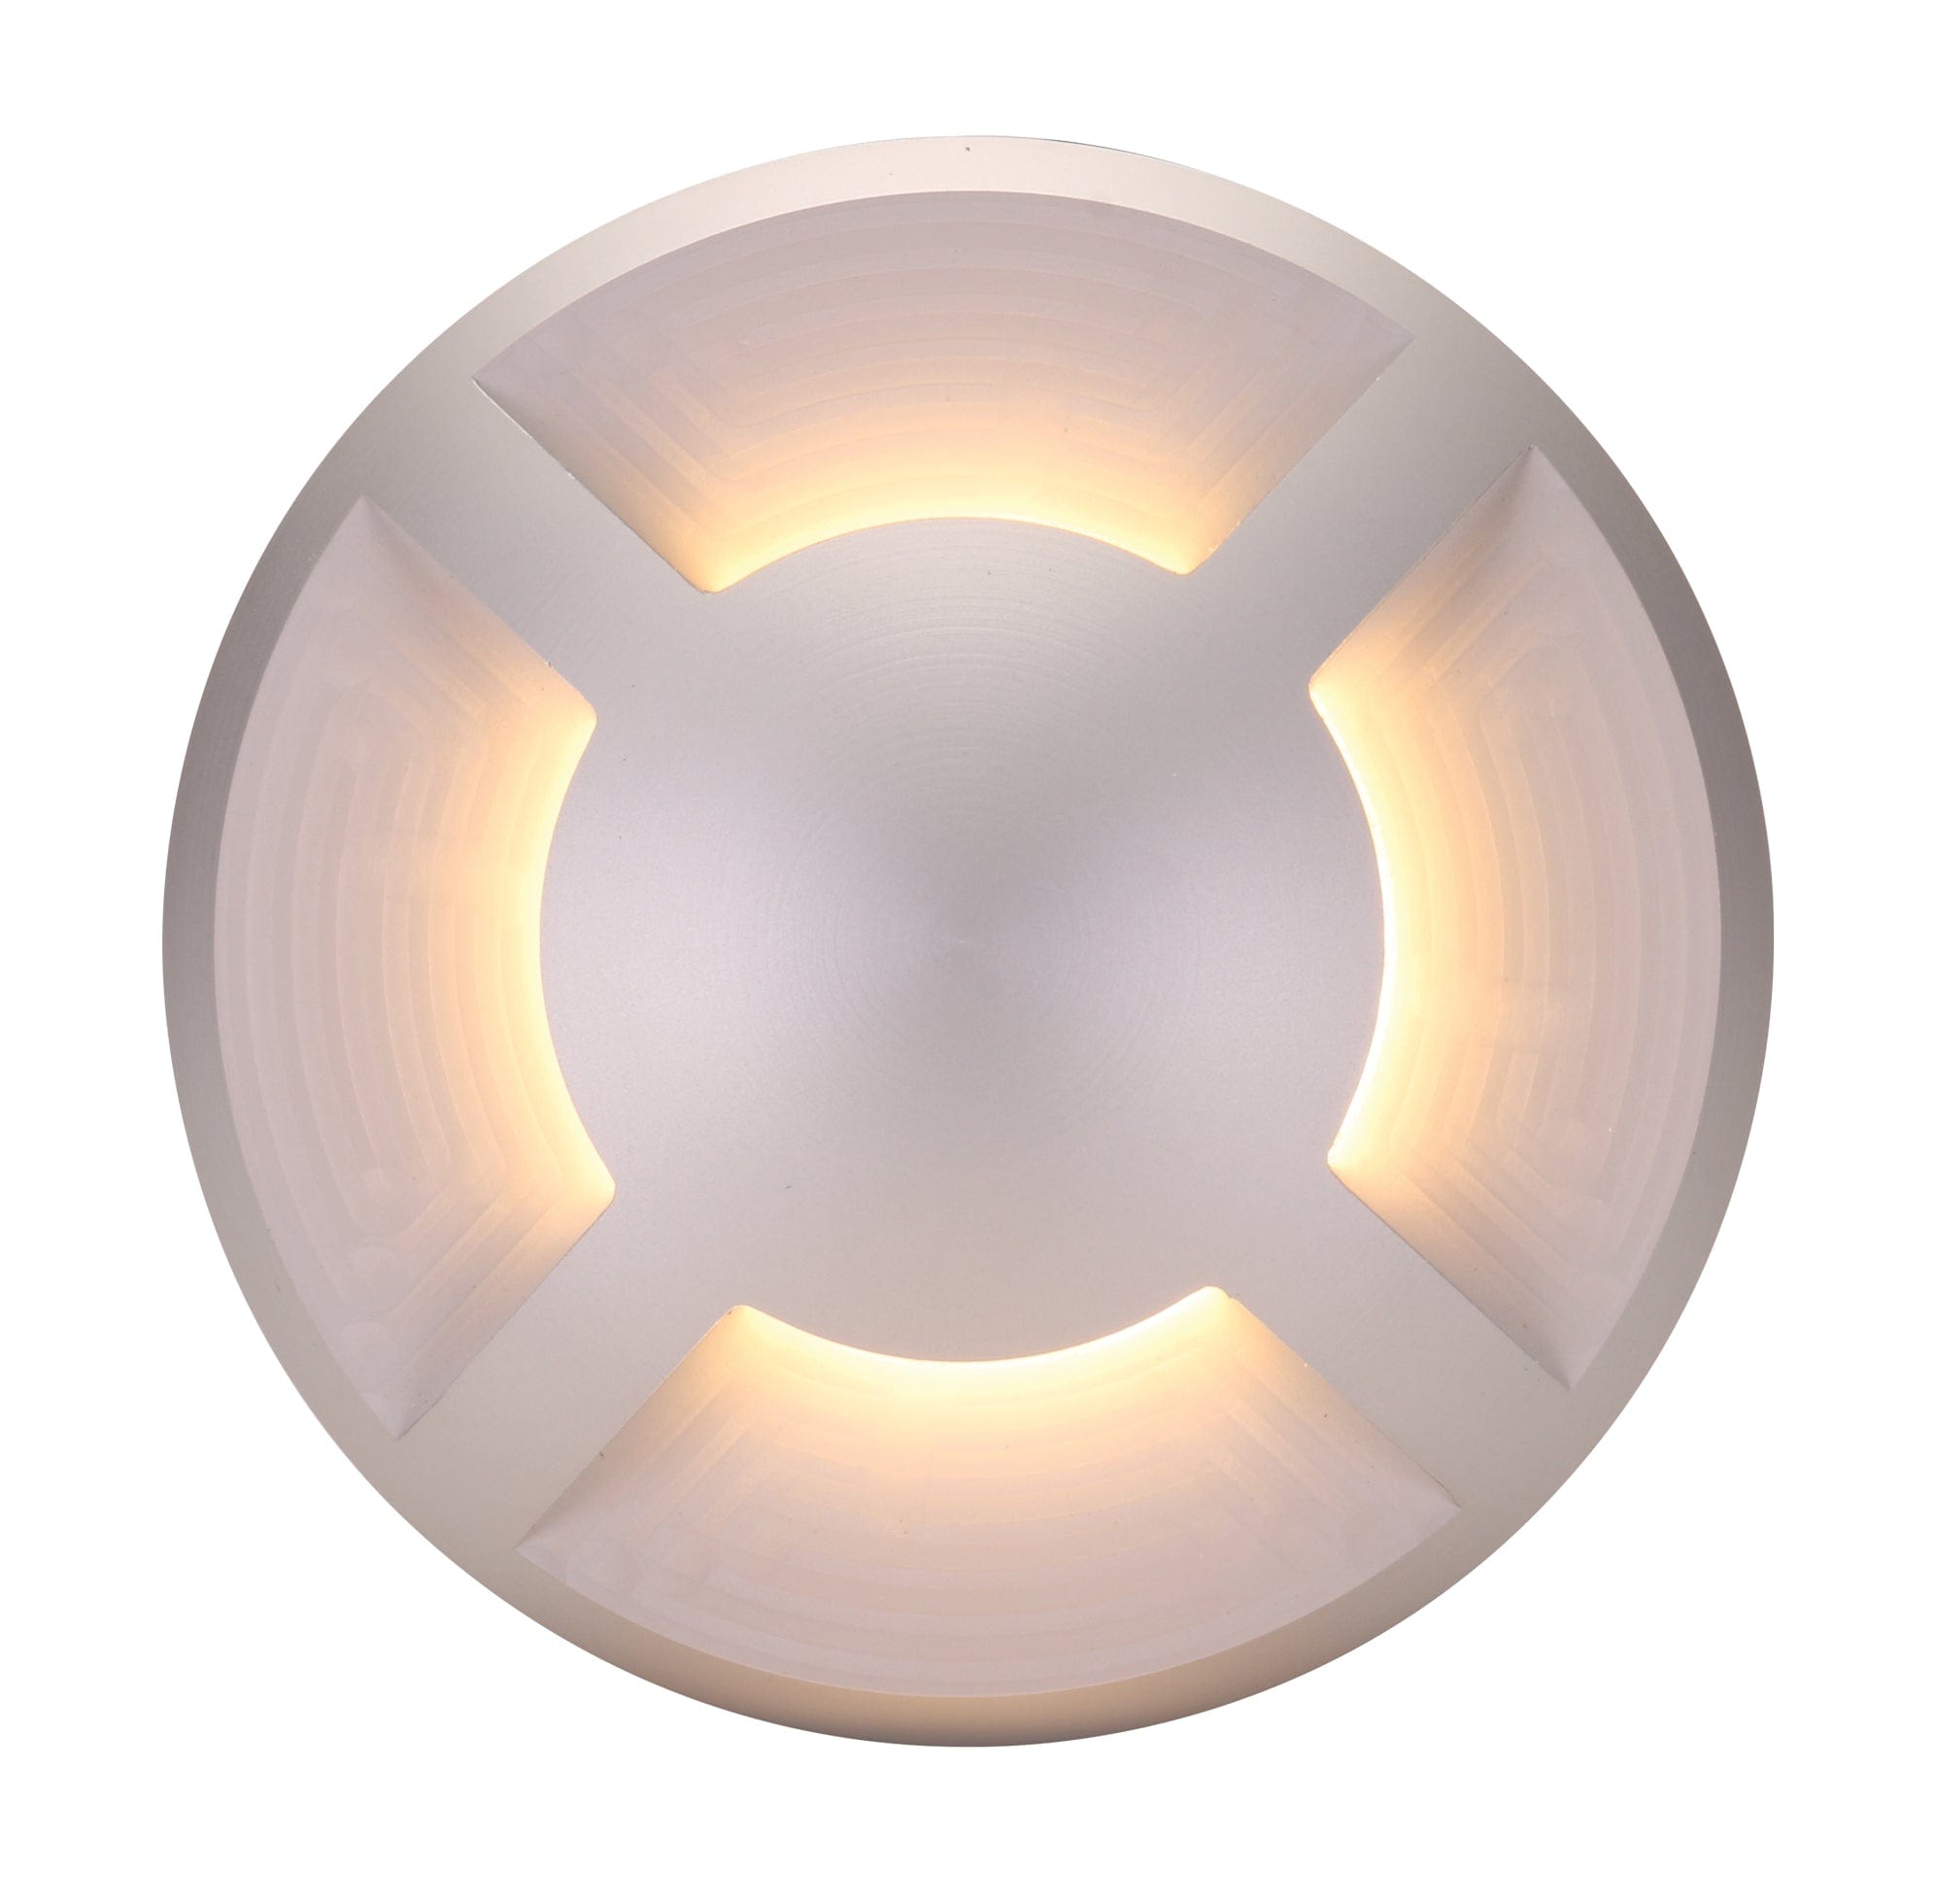 Domus Lighting Step Lights Cover Aluminium / 4 DEKA-COVER Round COVER ONLY Lights-For-You 19434